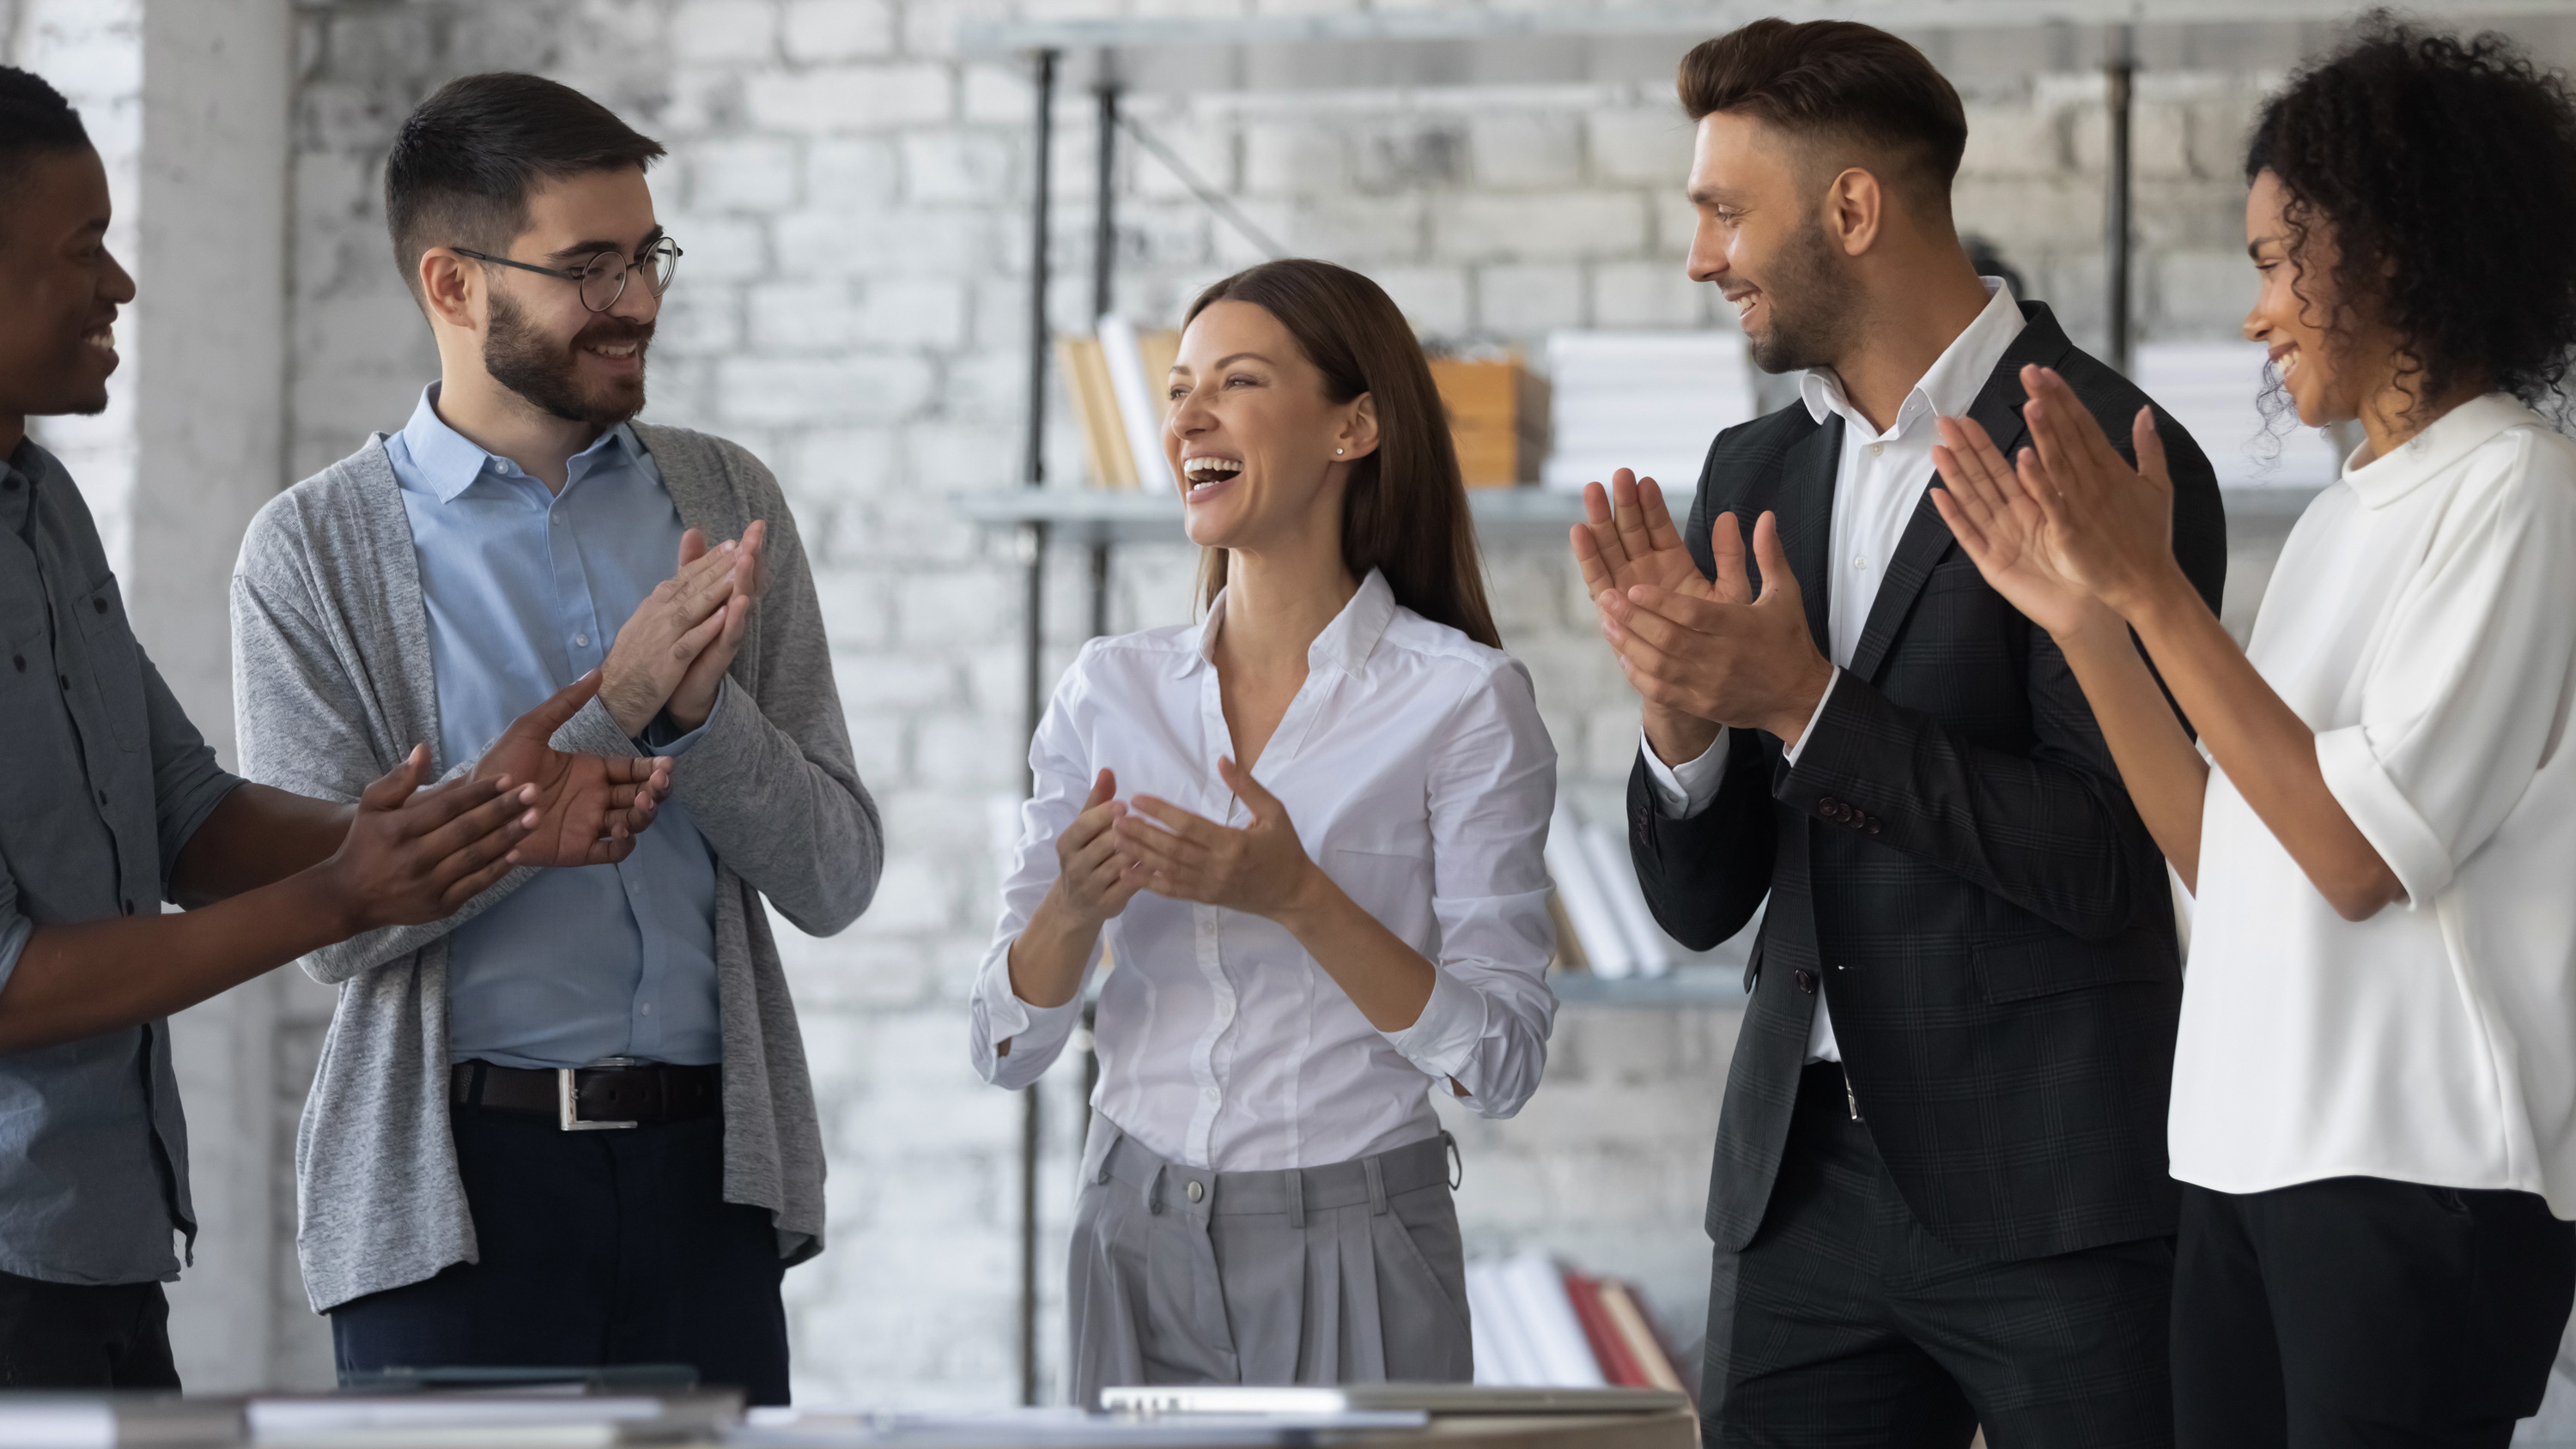 A group of business professionals applauding in unison, showing their appreciation and support for a successful achievement.